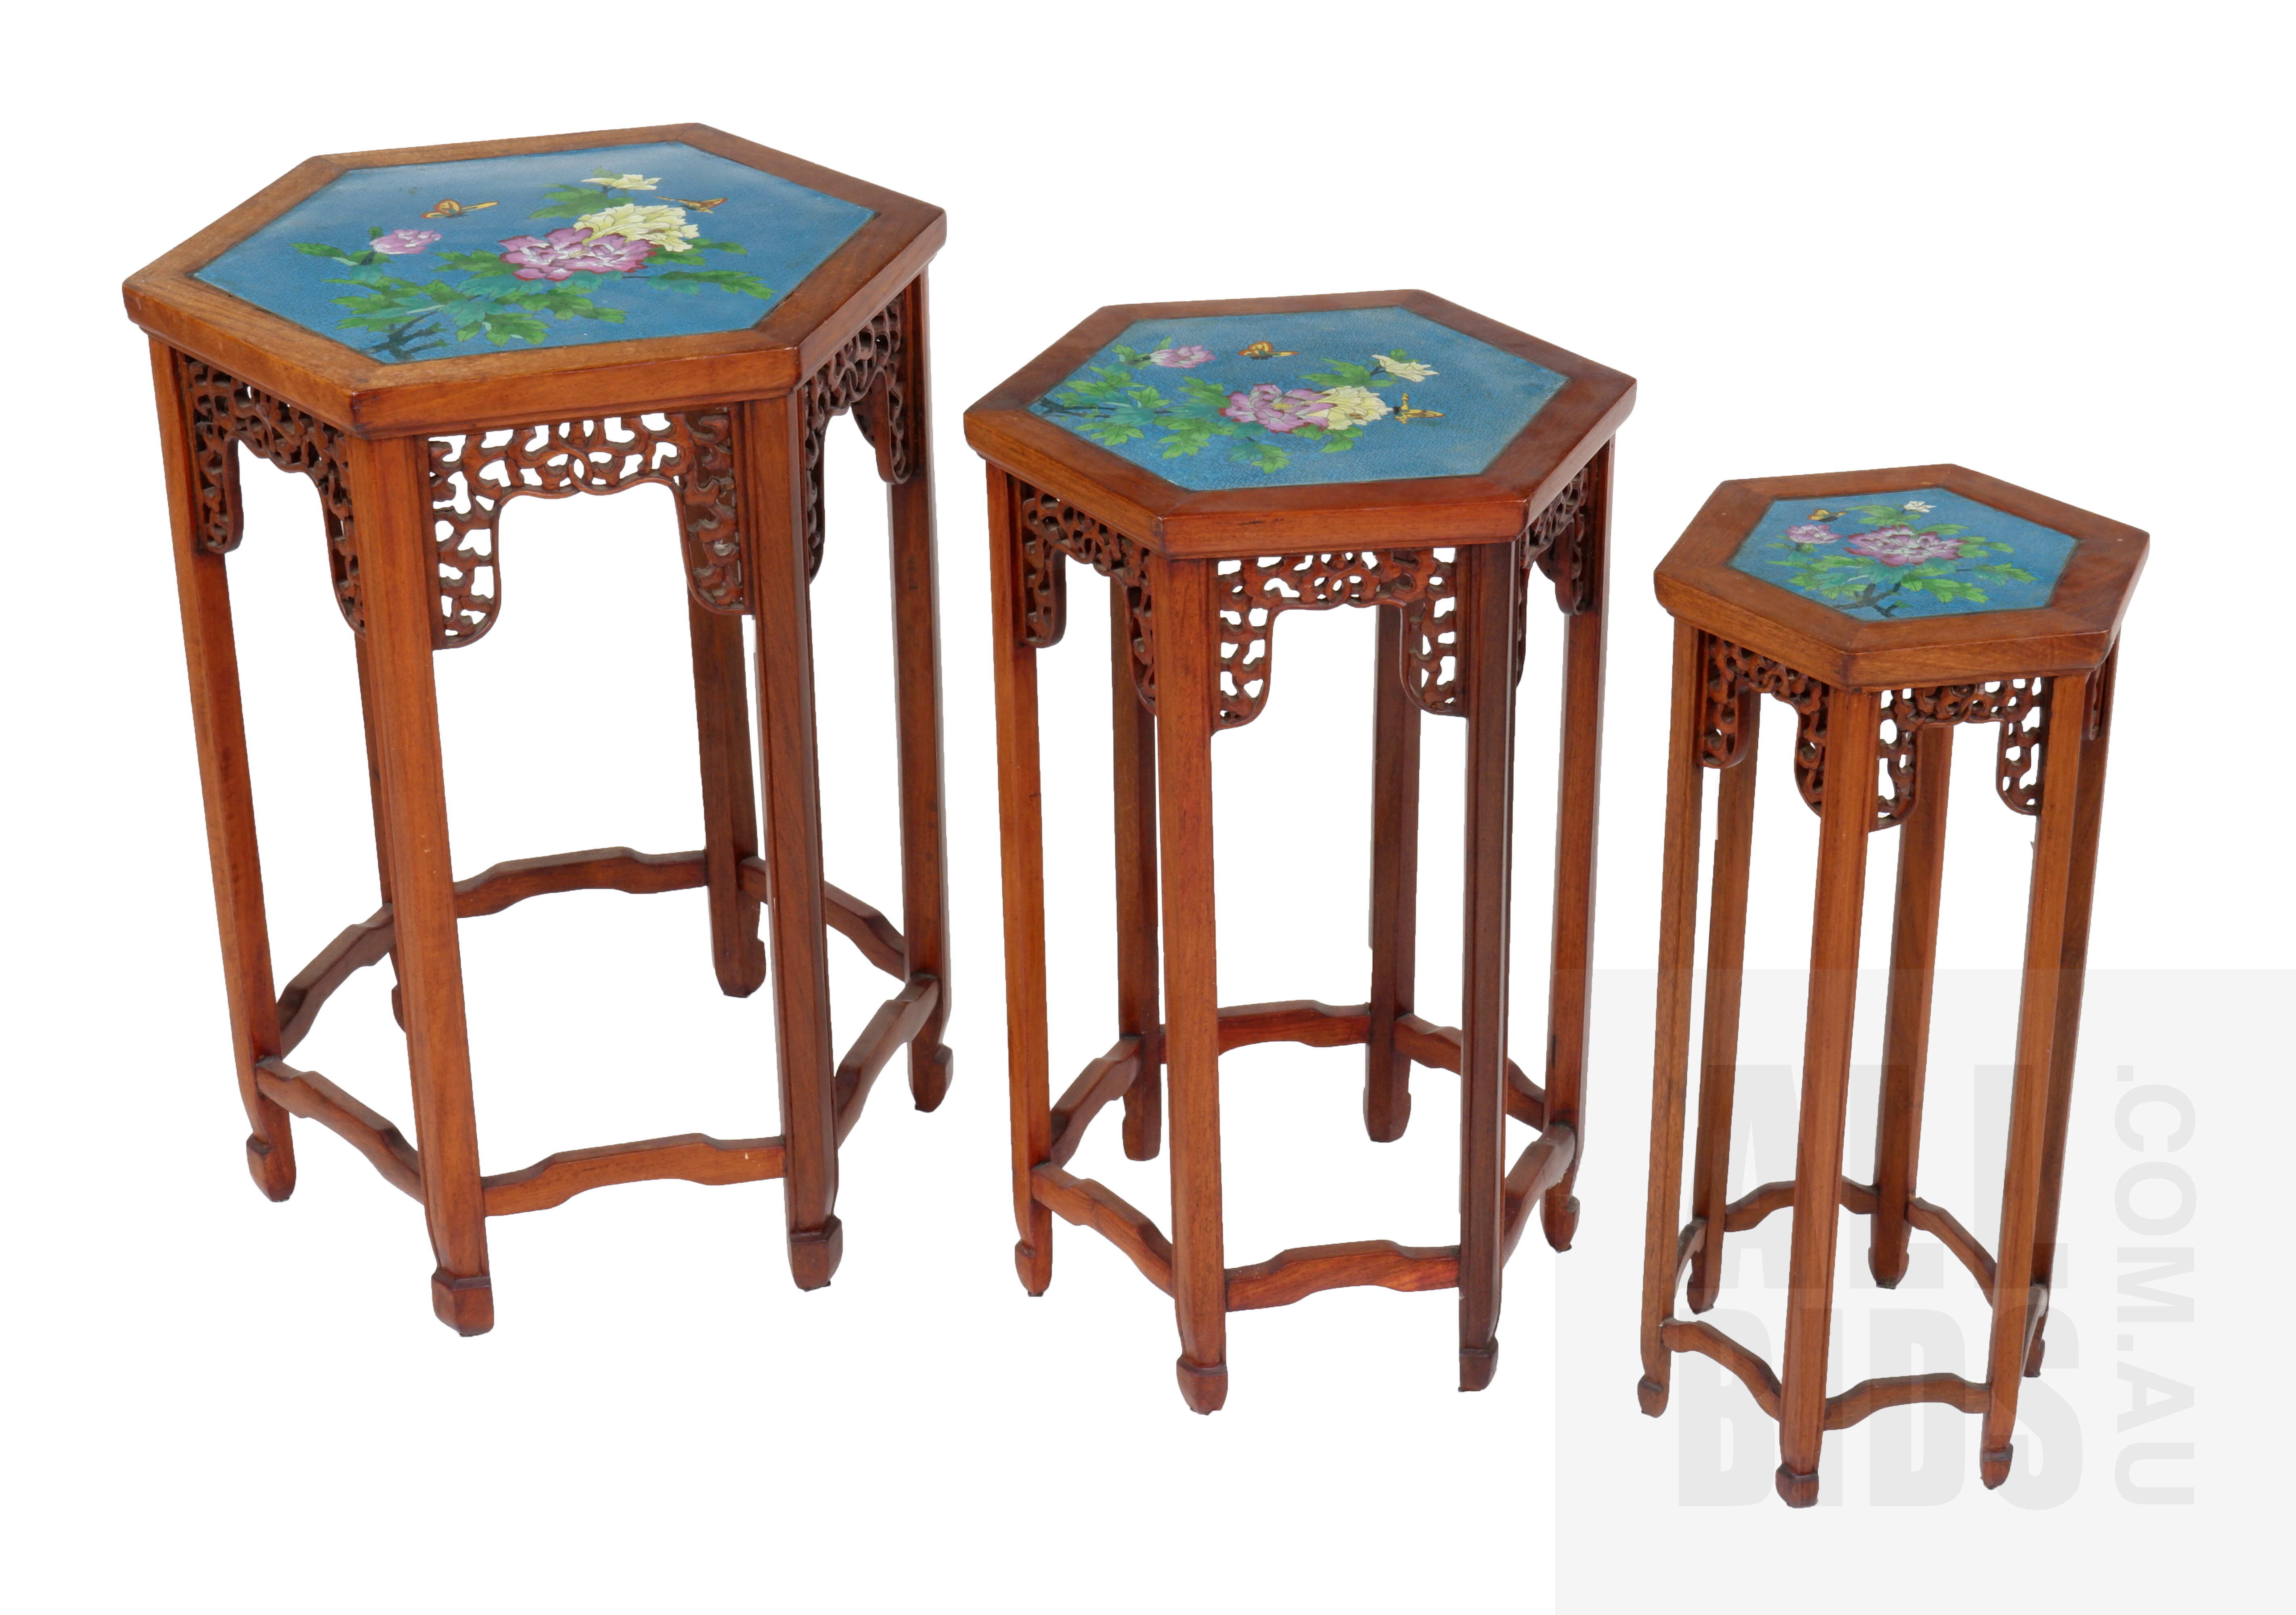 'Set of Three Chinese Carved Rosewood Nesting Tables with Cloisonne Enamel Tops, Early 20th Century'